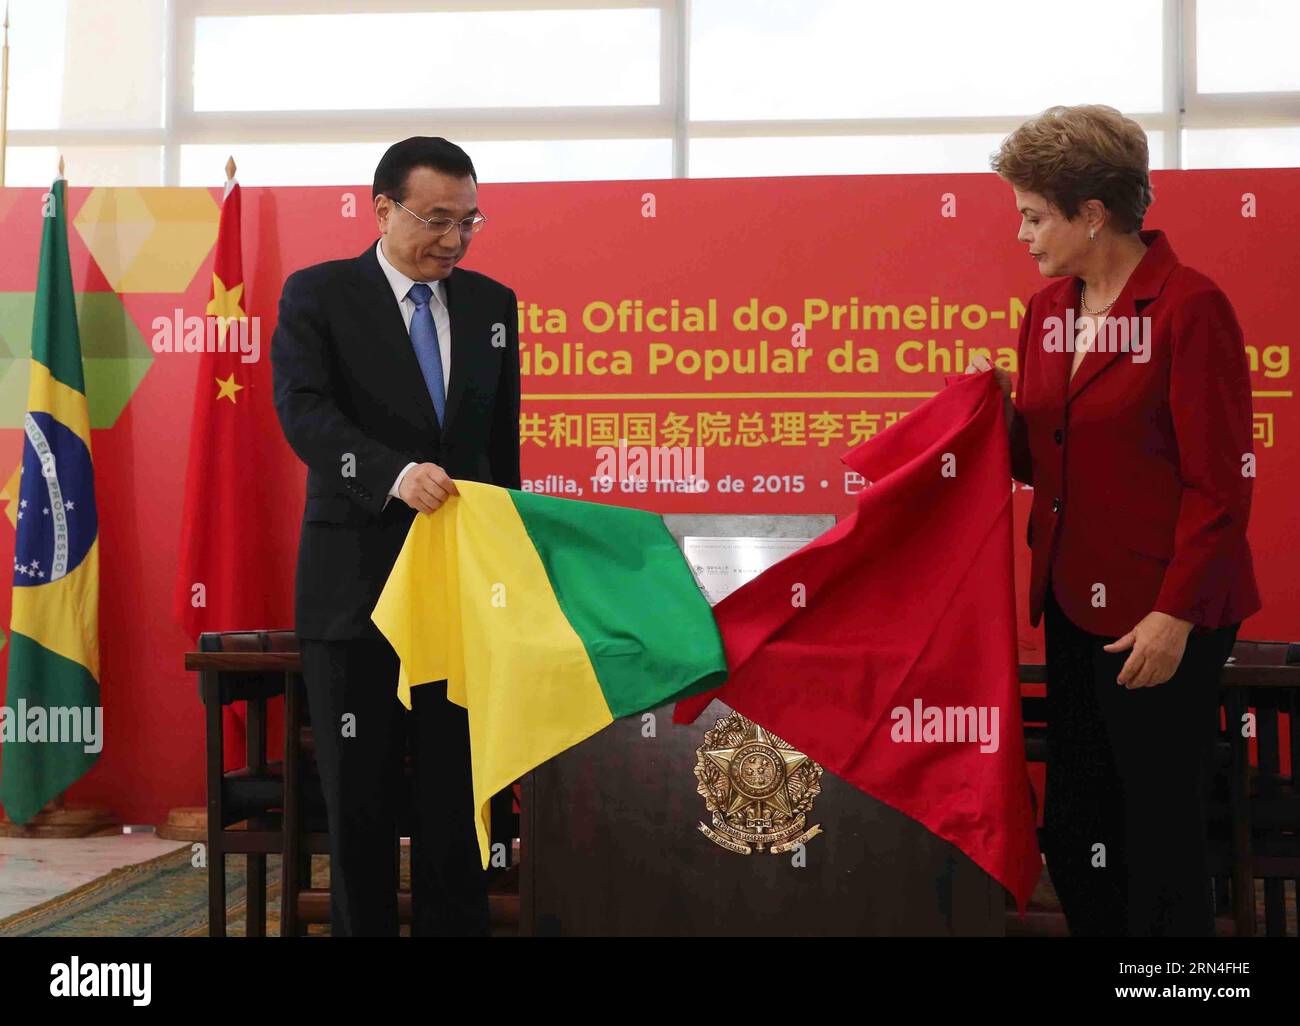 (150519) -- BRASILIA, May 19, 2015 -- Chinese Premier Li Keqiang (L) and Brazilian President Dilma Rousseff attend a video ground-breaking ceremony for the ultra-high voltage electricity transmission project at the Belo Monte hydroelectric dam, in Brasilia, capital of Brazil, May 19, 2015. In February 2014, China s State Grid won the bid to build power lines to the huge Belo Monte dam on the Xingu River in the state of Para, north Brazil. ) (wf) BRAZIL-BRASILIA-CHINESE PREMIER-BRAZILIAN PRESIDENT-POWER PROJECT LiuxWeibing PUBLICATIONxNOTxINxCHN   150519 Brasilia May 19 2015 Chinese Premier lef Stock Photo